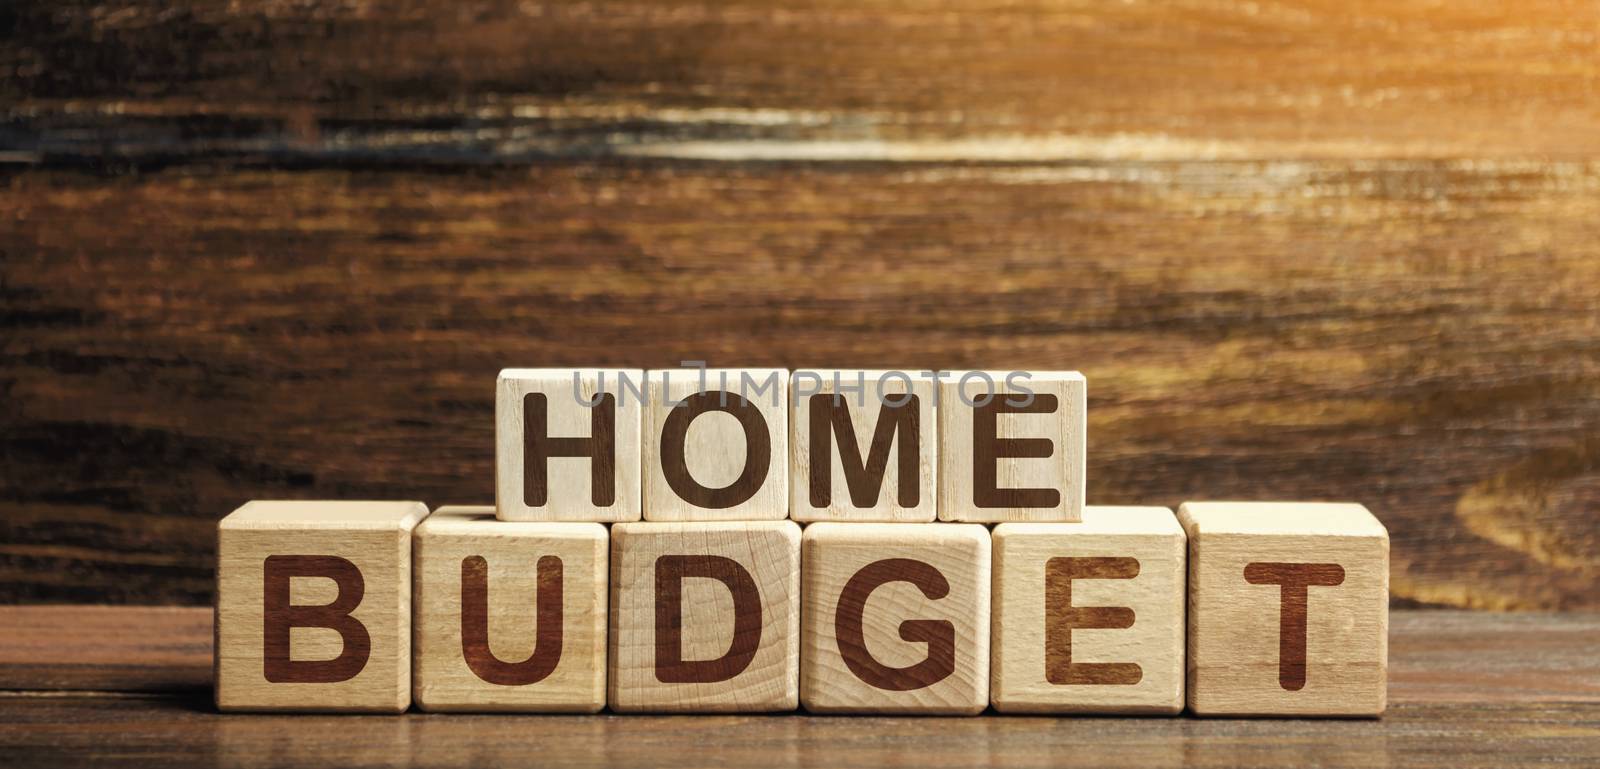 Home budget made of blocks. Planning financial income and expenses, saving and reducing expenses. Self-control, monitoring. Economic literacy and foresight, accumulation of savings. Payment of taxes.